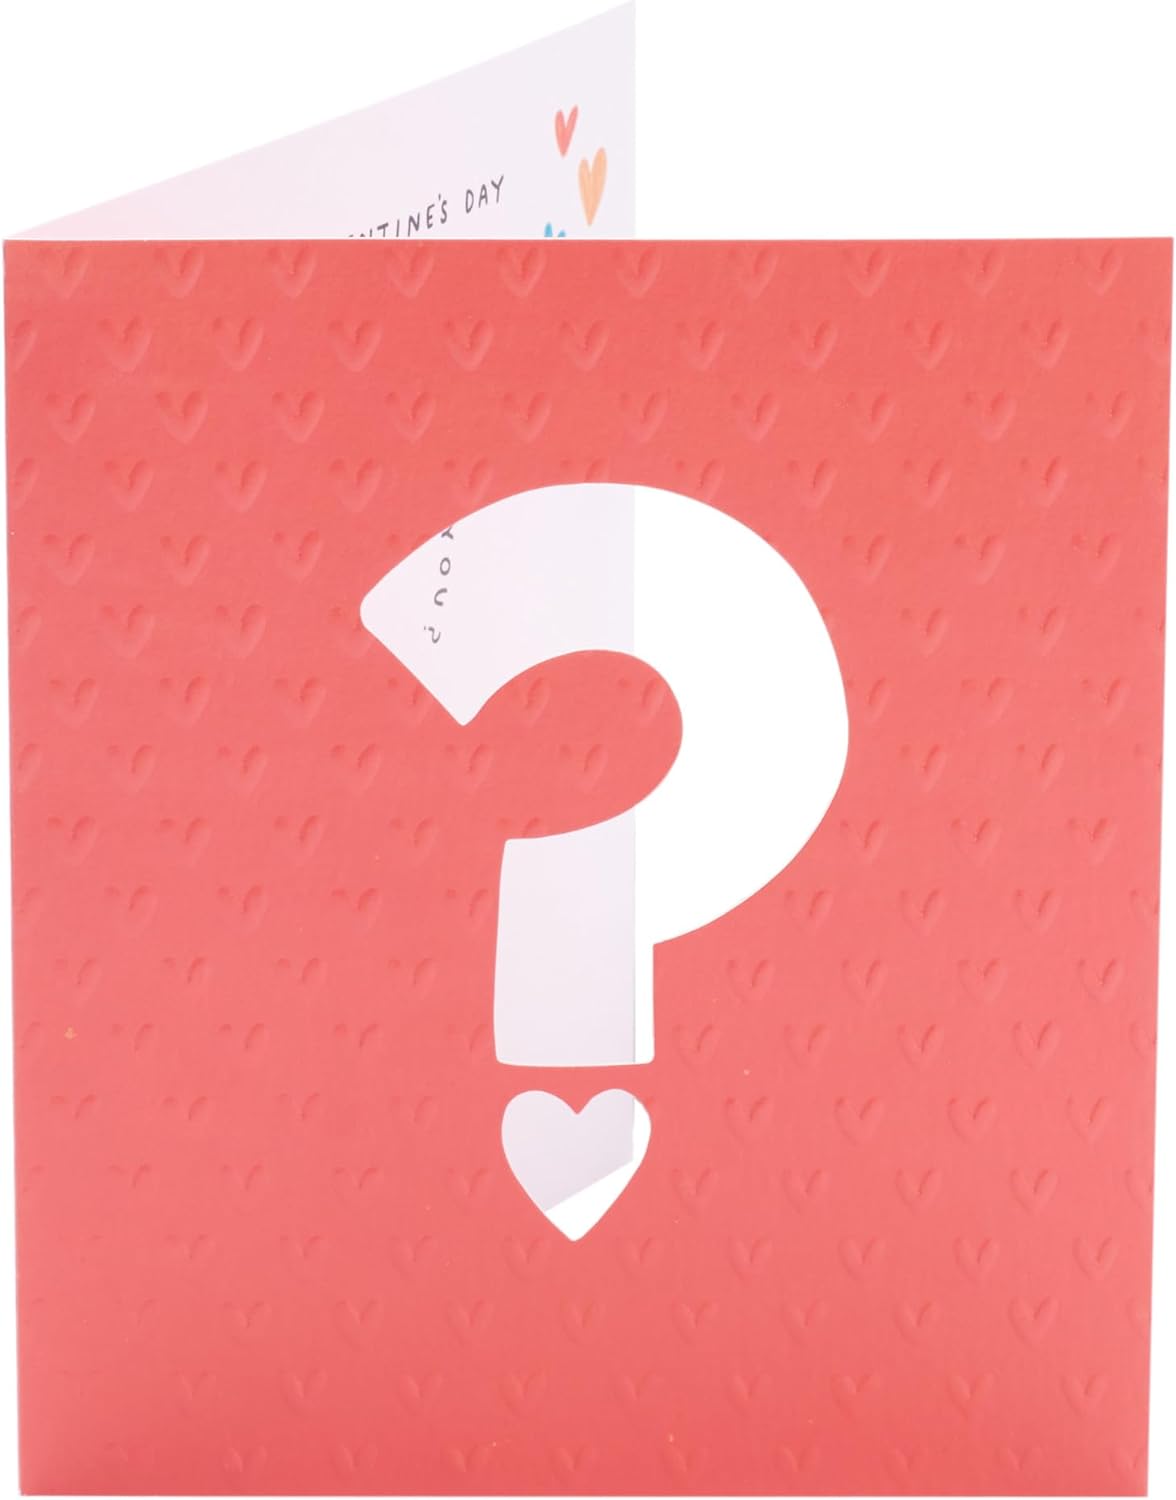 Question Mark Design From A Secret Admirer Valentine's Day Card